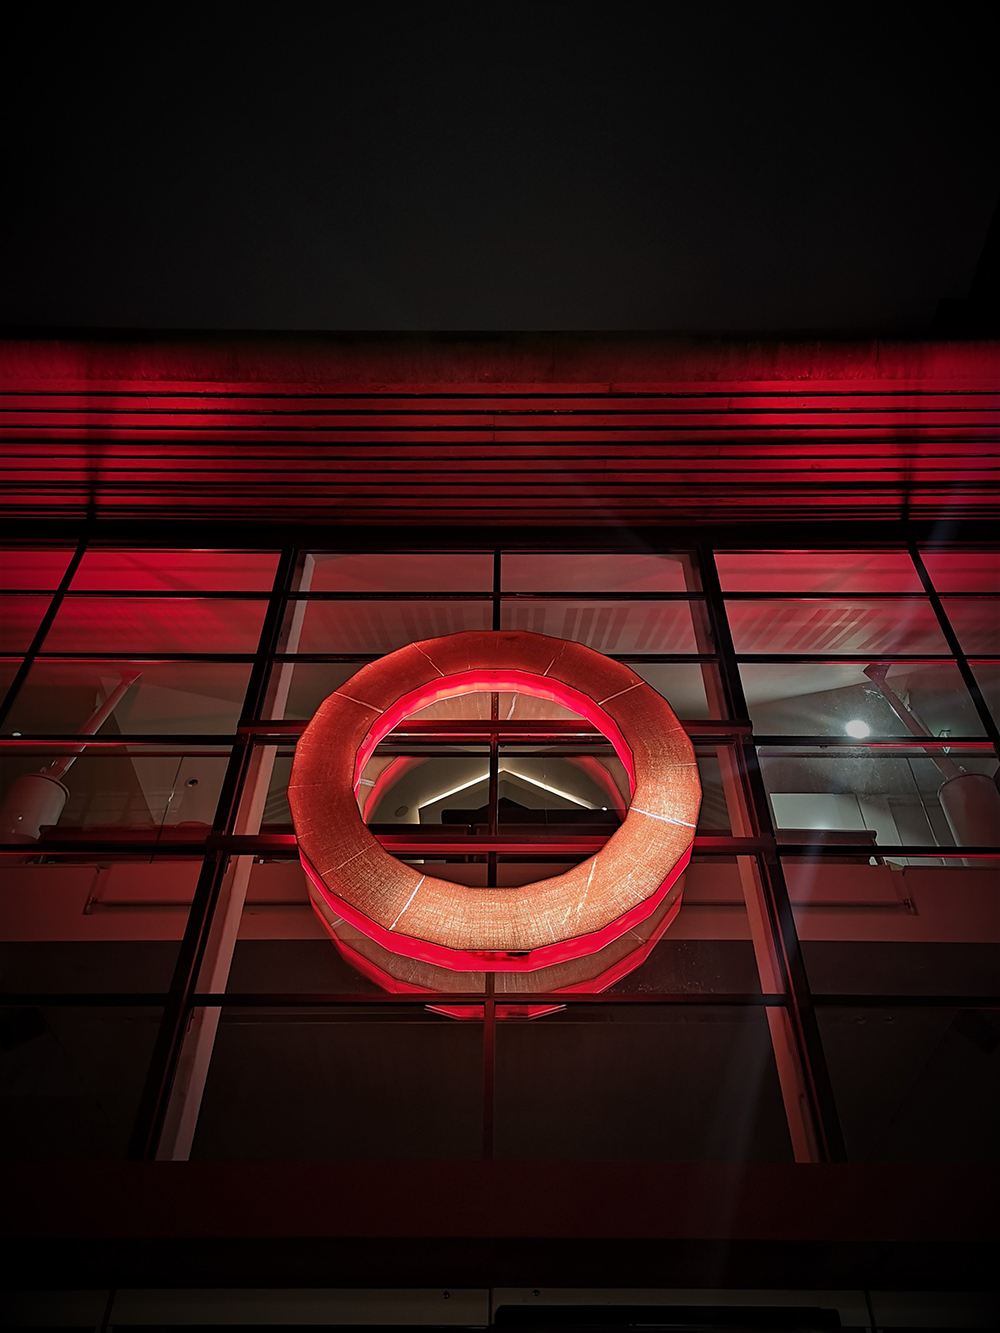 The red circular logo of Shakespeare's Globe is backlit by red light.